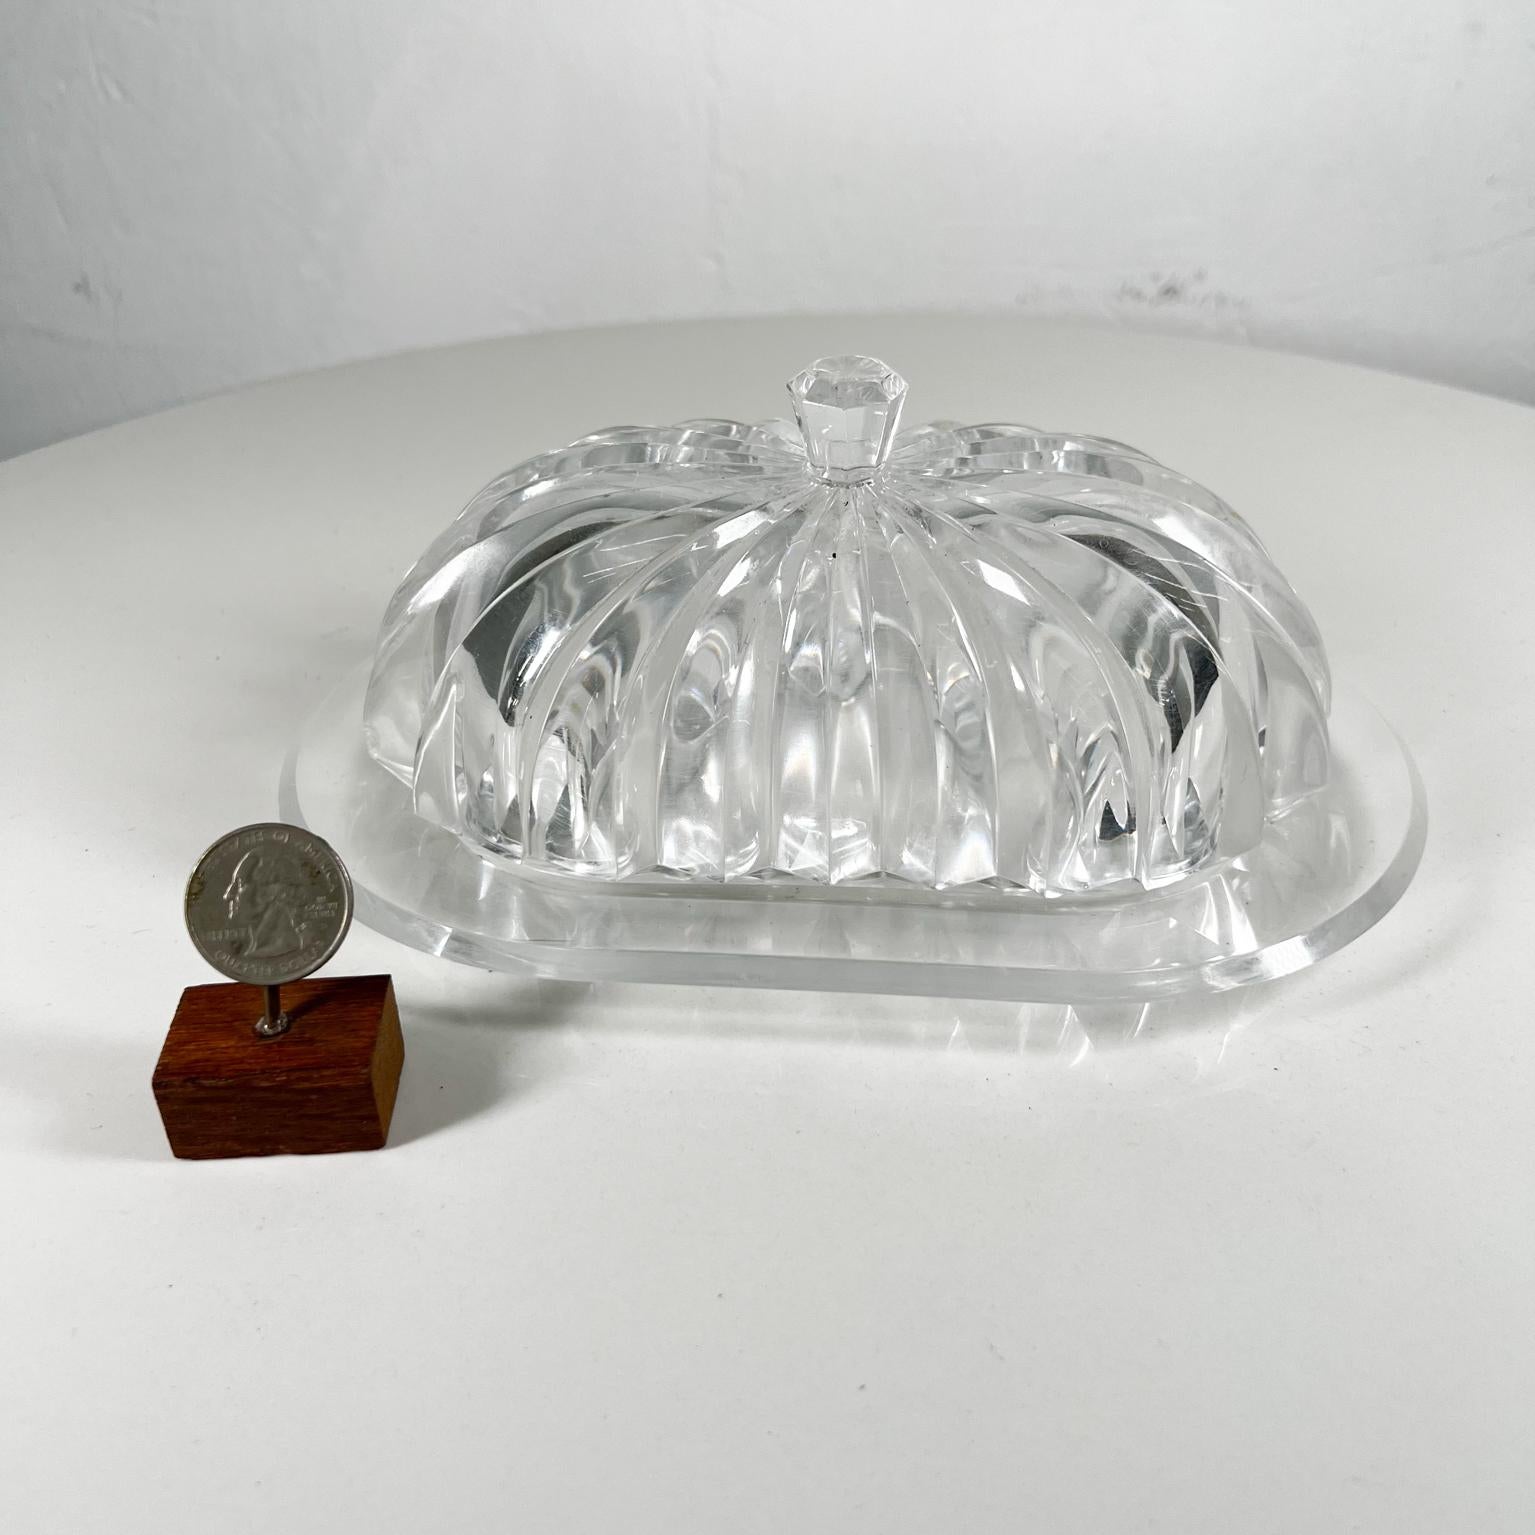 Mid-Century Modern Ribbed Butter Dish Tiara lucite 
Grainware by William Bounds
Butter tray with lid.
Made of lucite
Grainware USA
8.5 x 5.5 w x 3 tall
Preowned vintage condition
See all images.